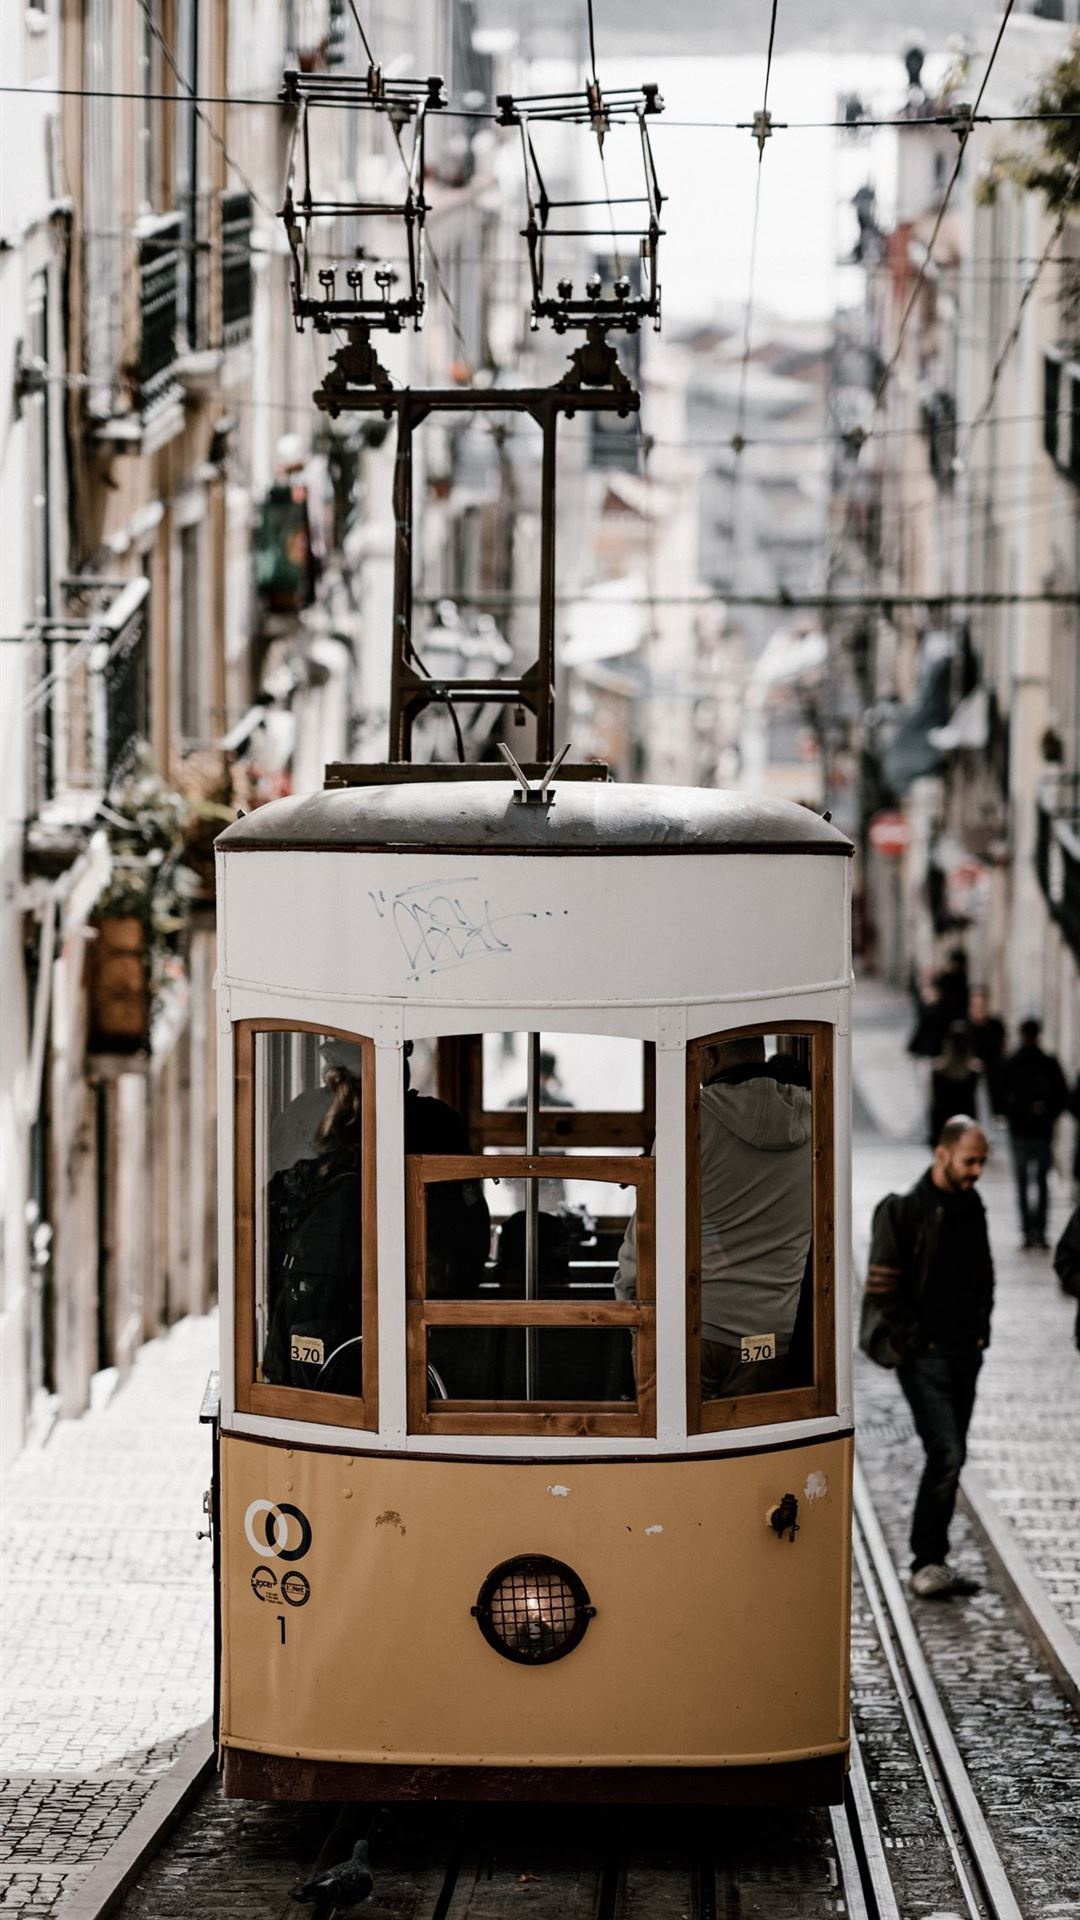 Lisbon attractions, Travel recommendations, Sightseeing guide, Free download, 1080x1920 Full HD Handy